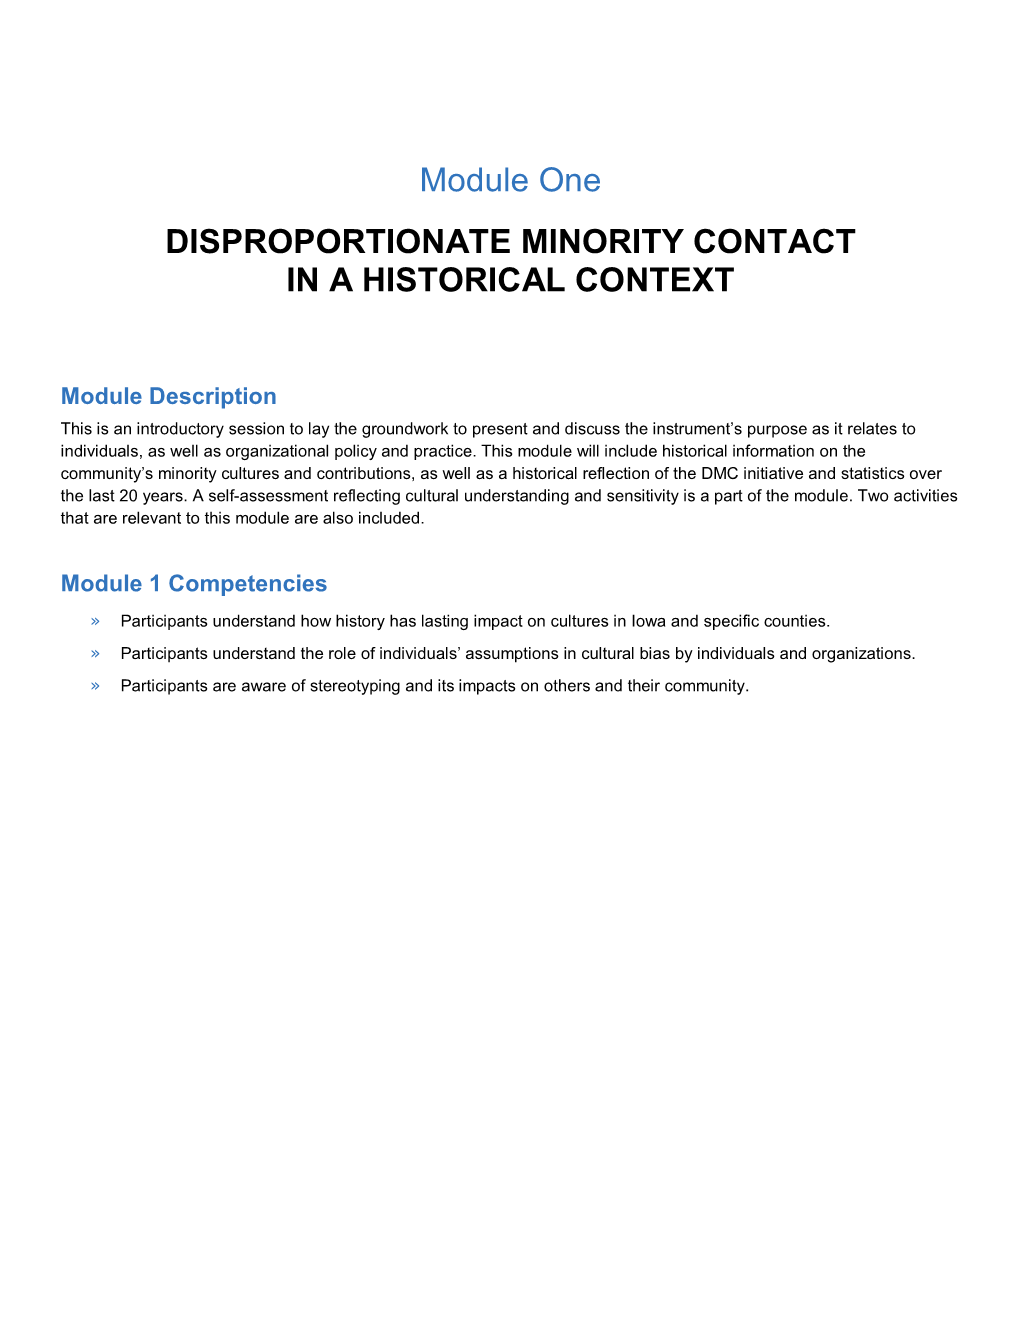 Module One DISPROPORTIONATE MINORITY CONTACT in a HISTORICAL CONTEXT